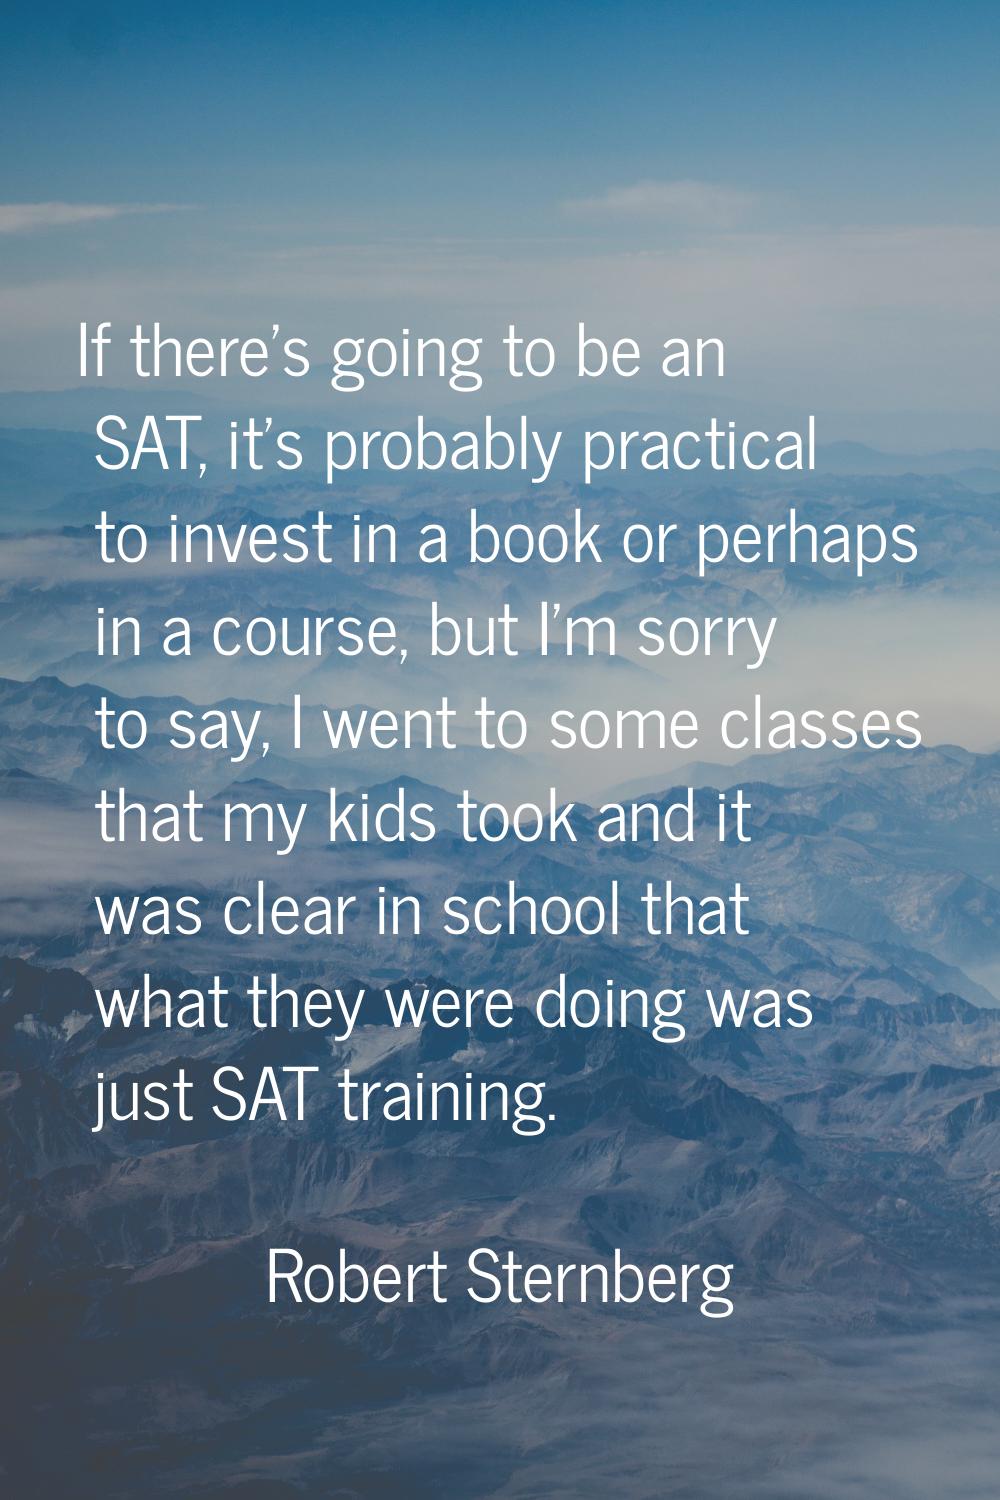 If there's going to be an SAT, it's probably practical to invest in a book or perhaps in a course, 